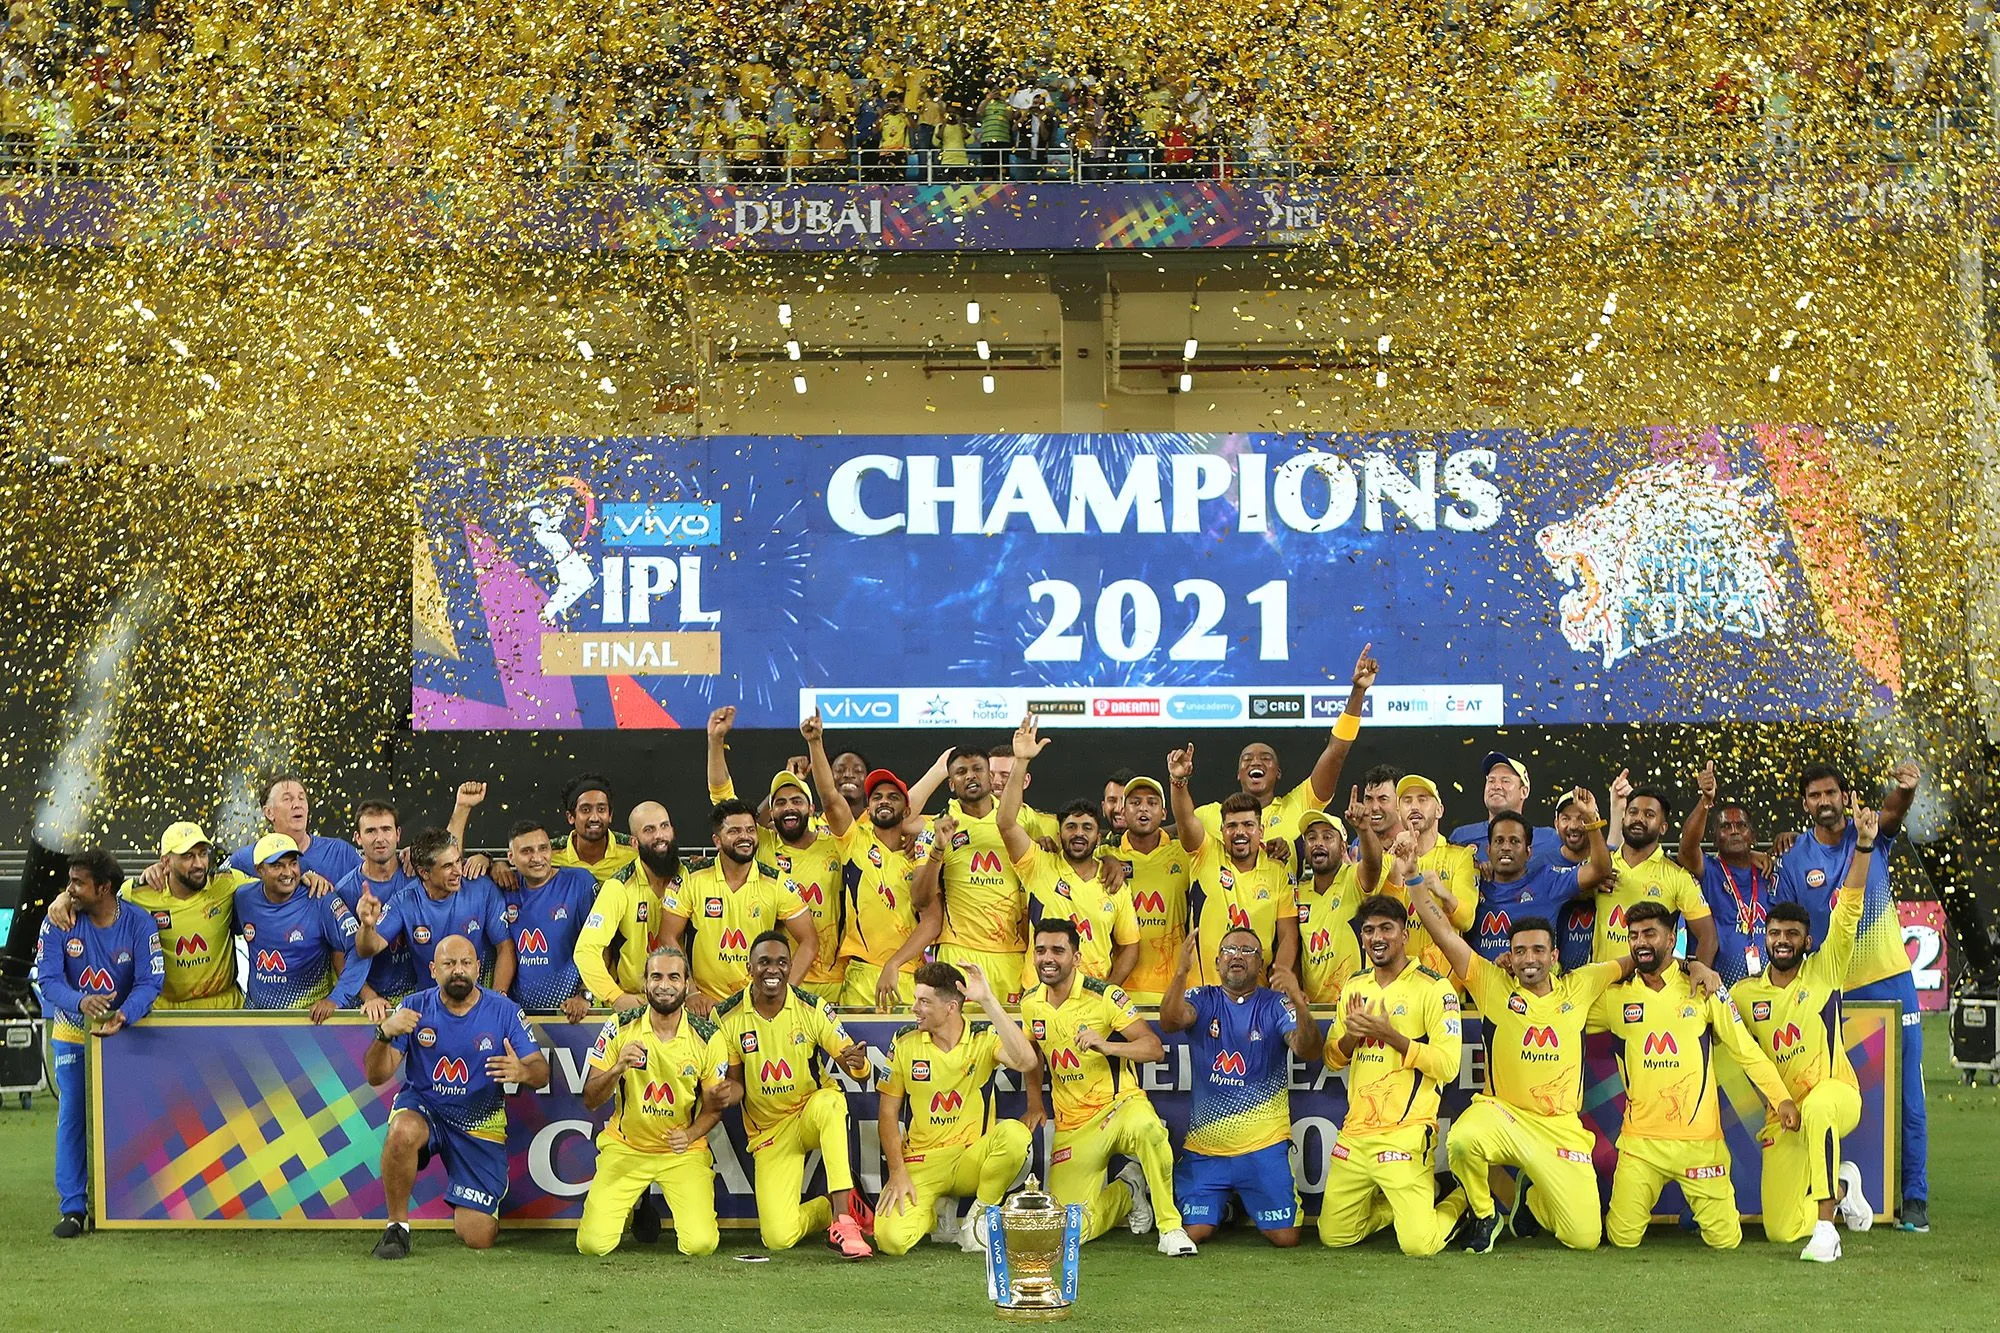 CSK won their fourth IPL title by beating KKR in the IPL 2021 final in Dubai | BCCI-IPL